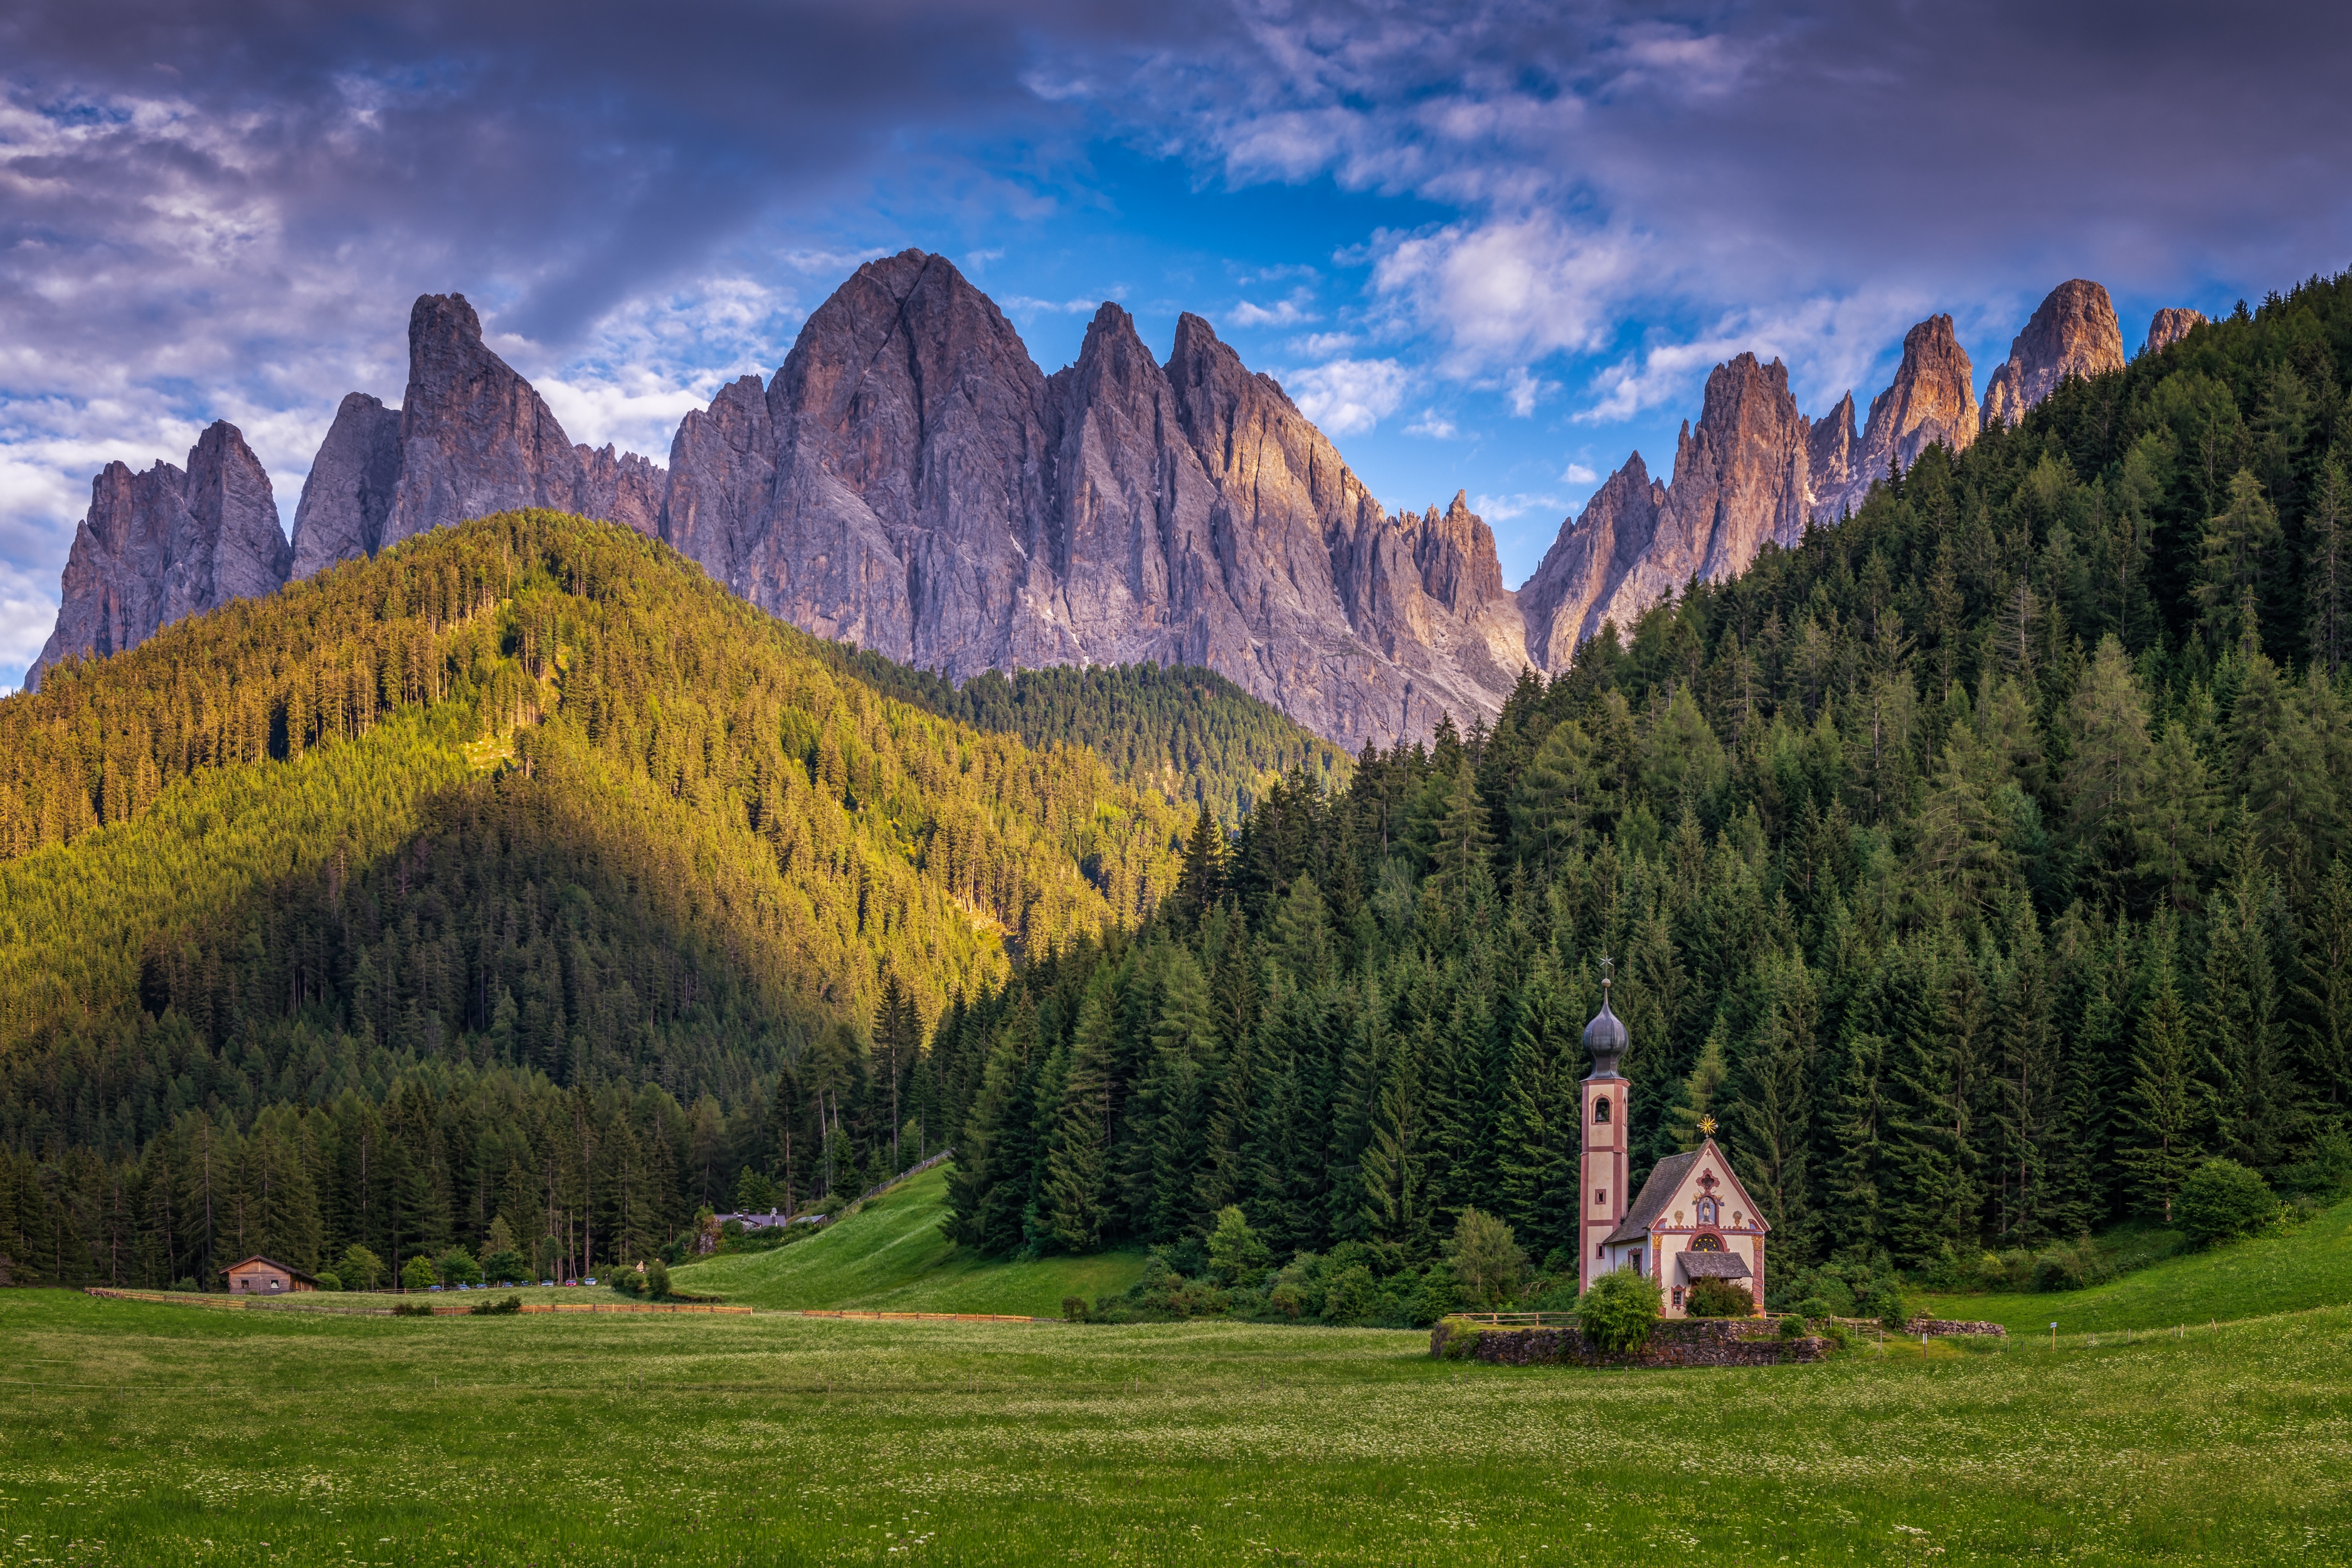 Wallpapers Dolomites chiesa di S Giovanni Italy on the desktop